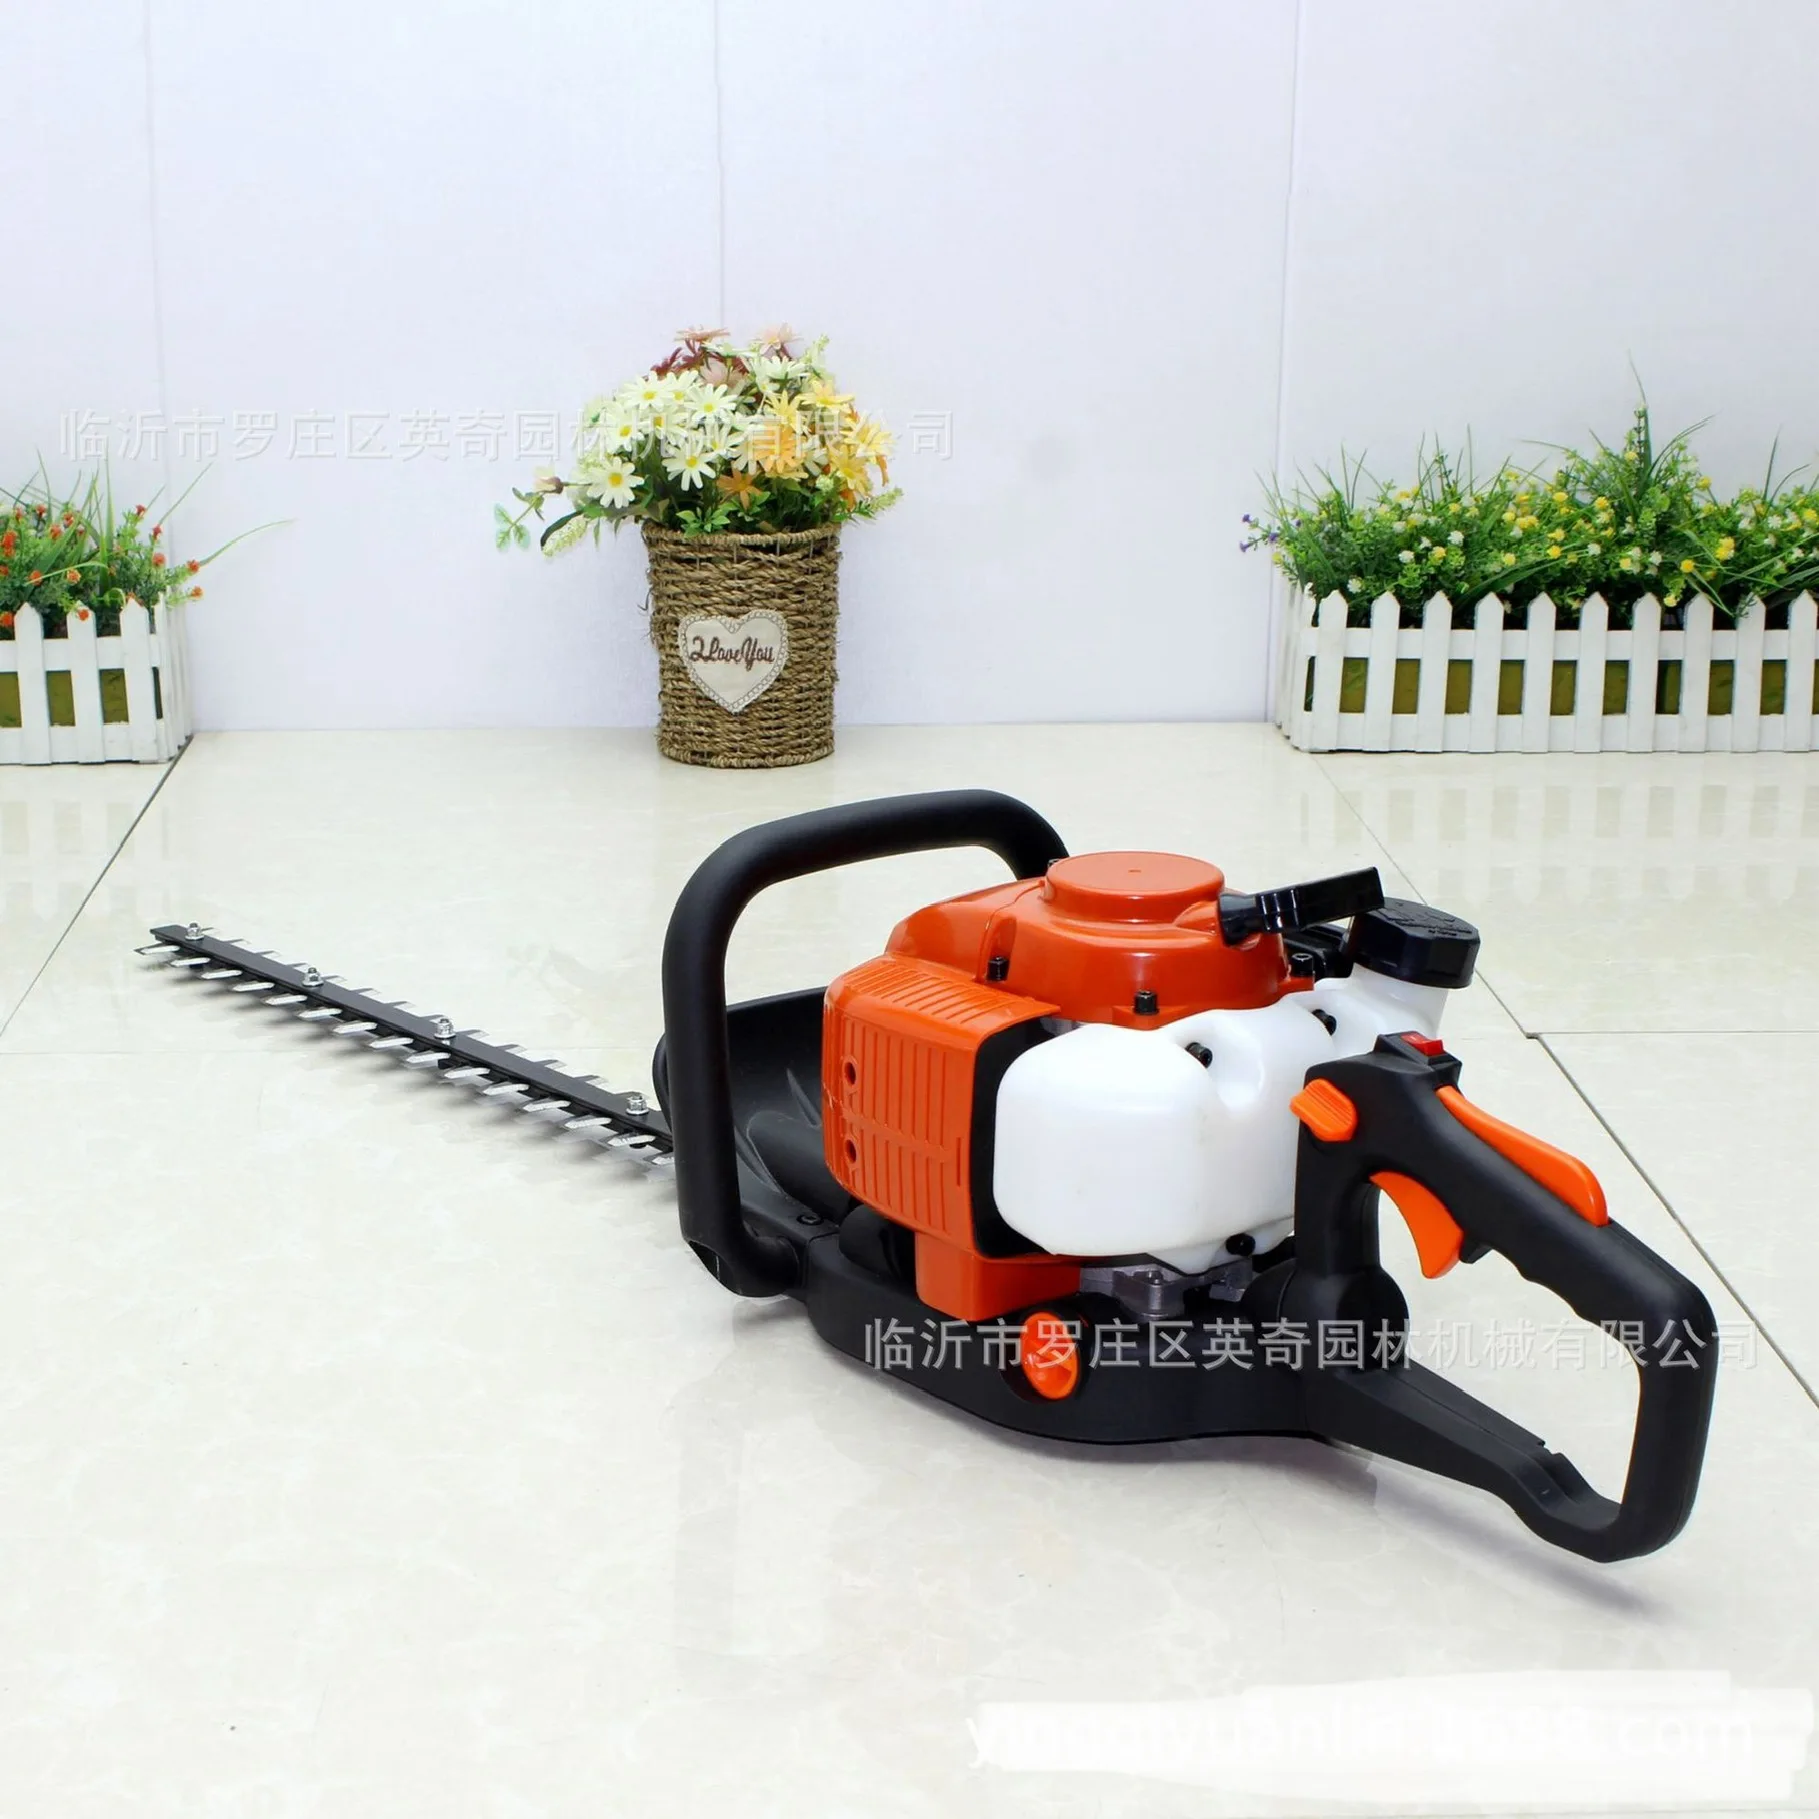 

6010 Gasoline Hedge Trimmer 2 Stroke 22.5CC Double Blade Fence Landscaping Hedge Pruning Shears